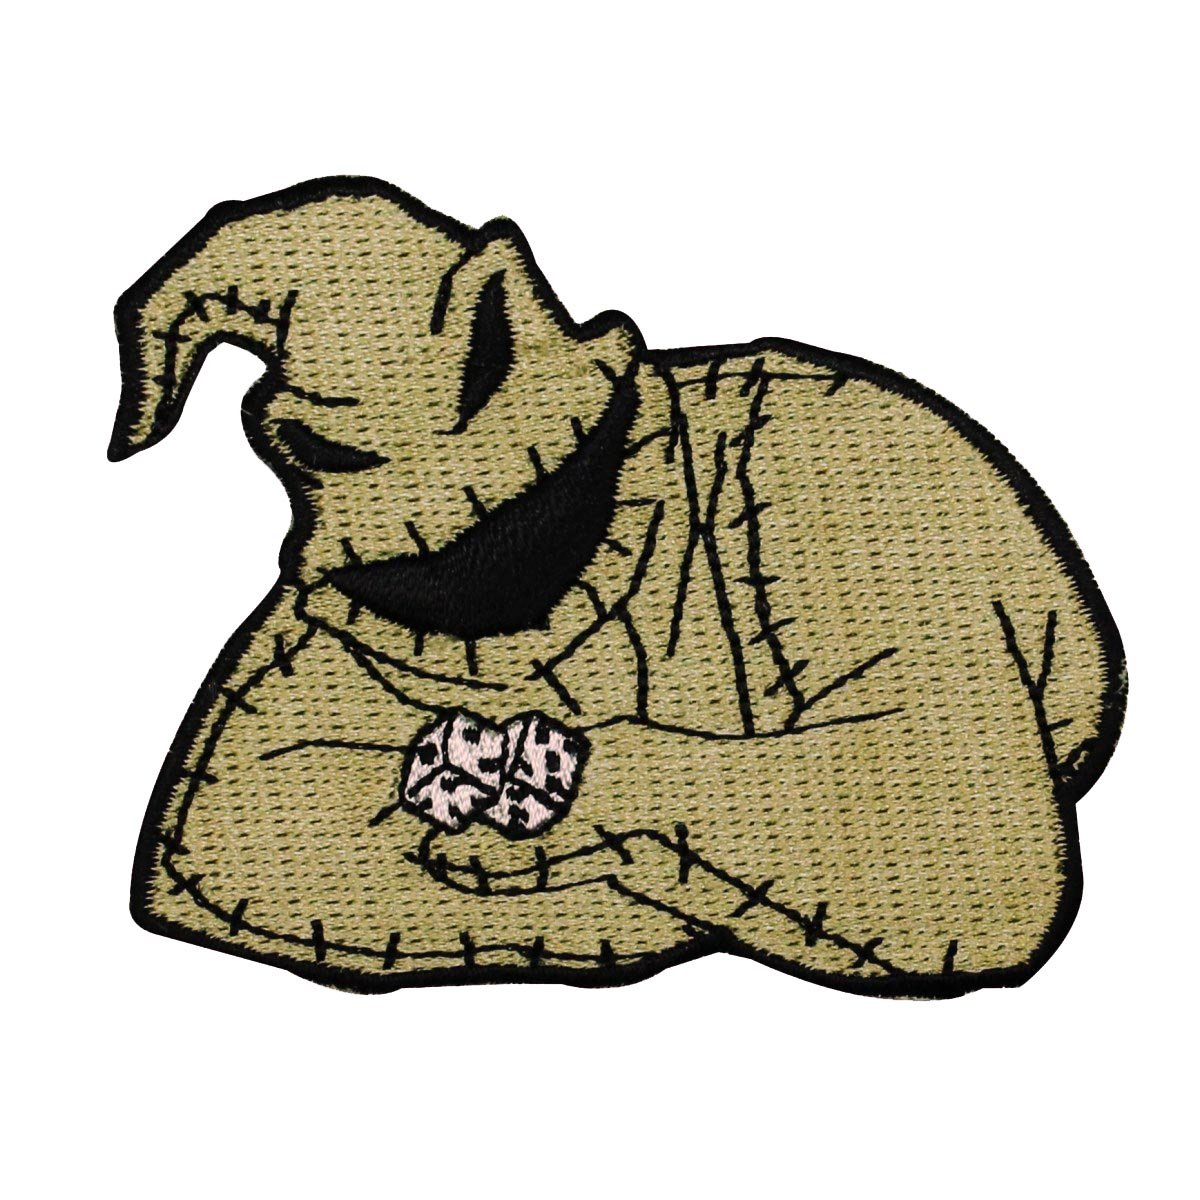 Oogie boogie nightmare before christmas character craft iron on applique patch